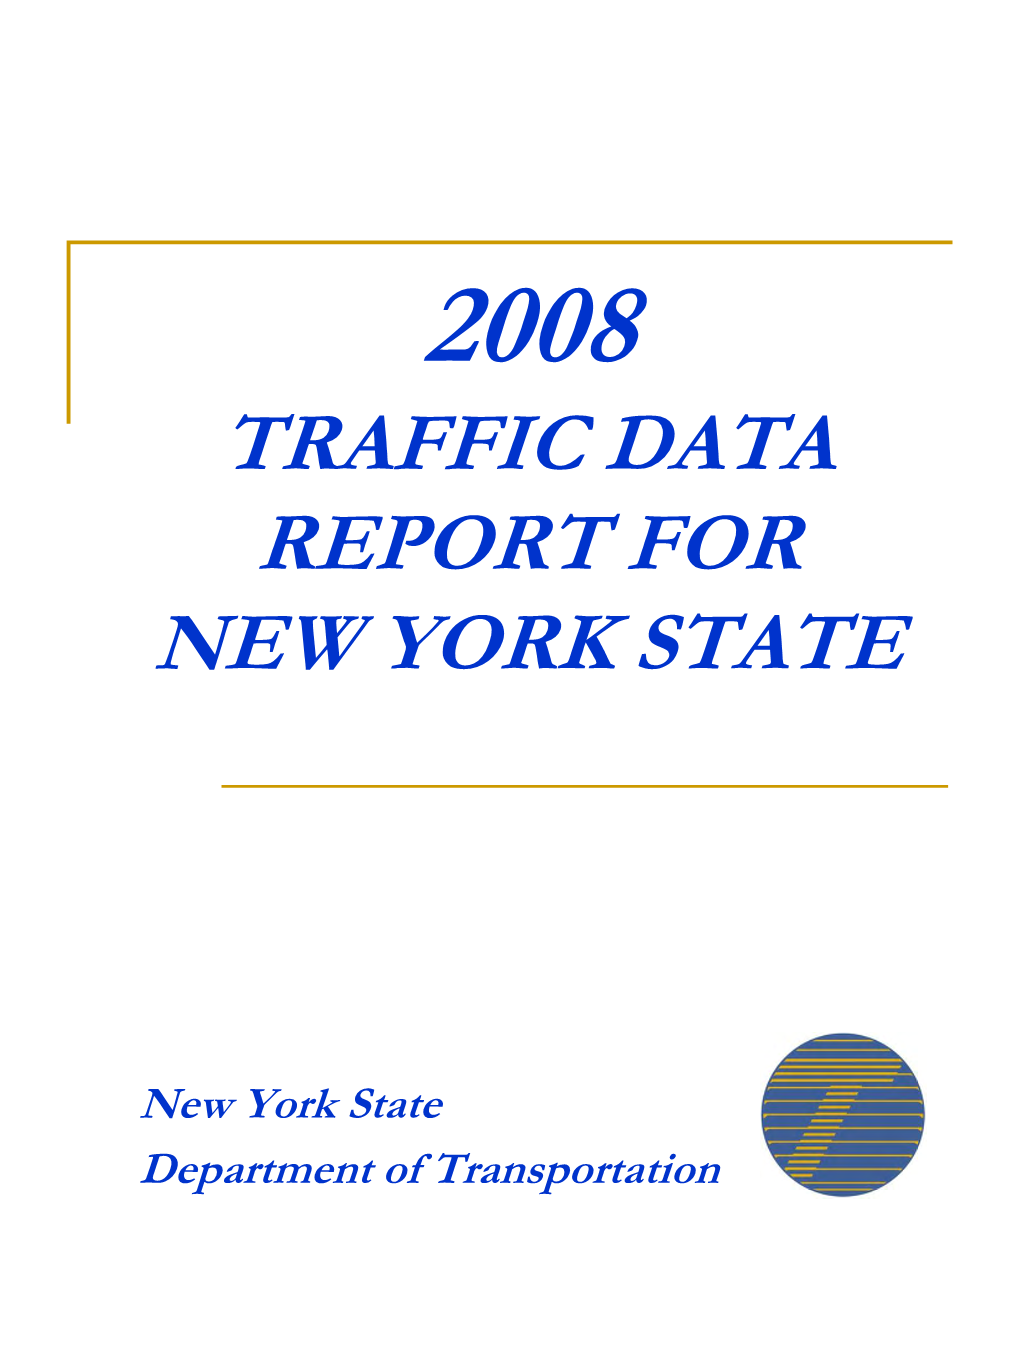 2008 Traffic Data Report for New York State